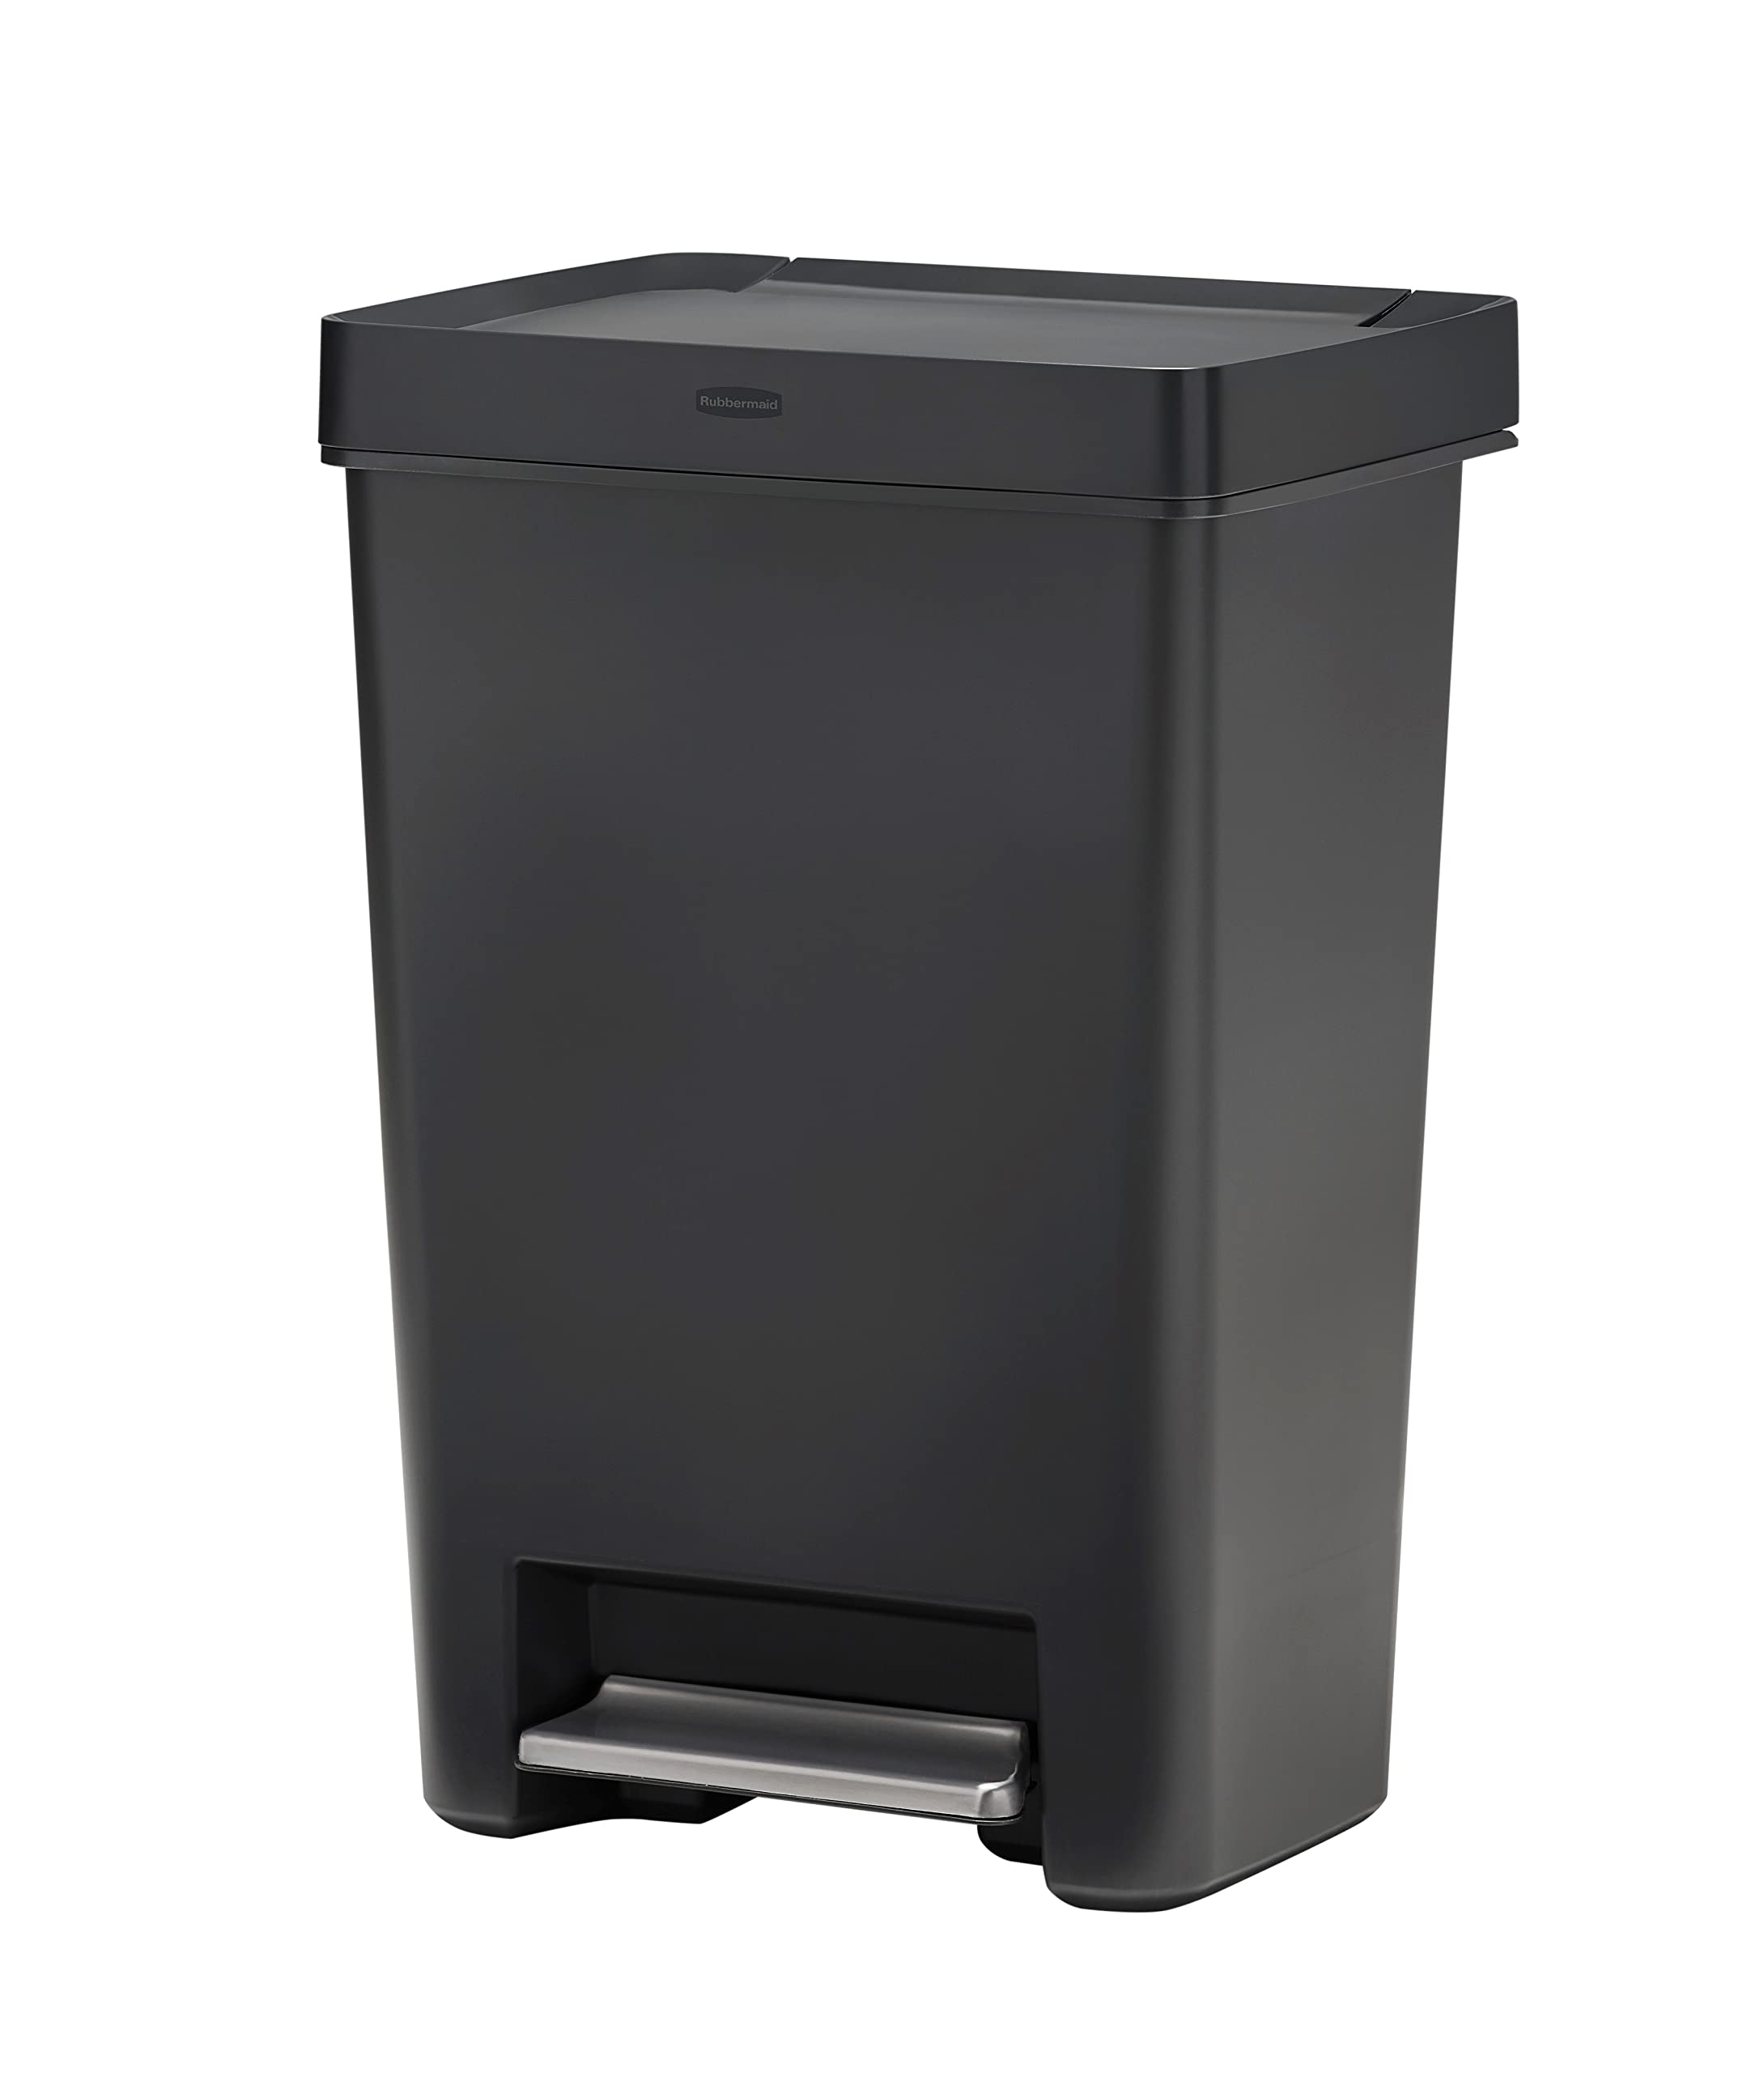 Rubbermaid Step-On Lid Trash Can for Home, Kitchen, and Bathroom Garbage